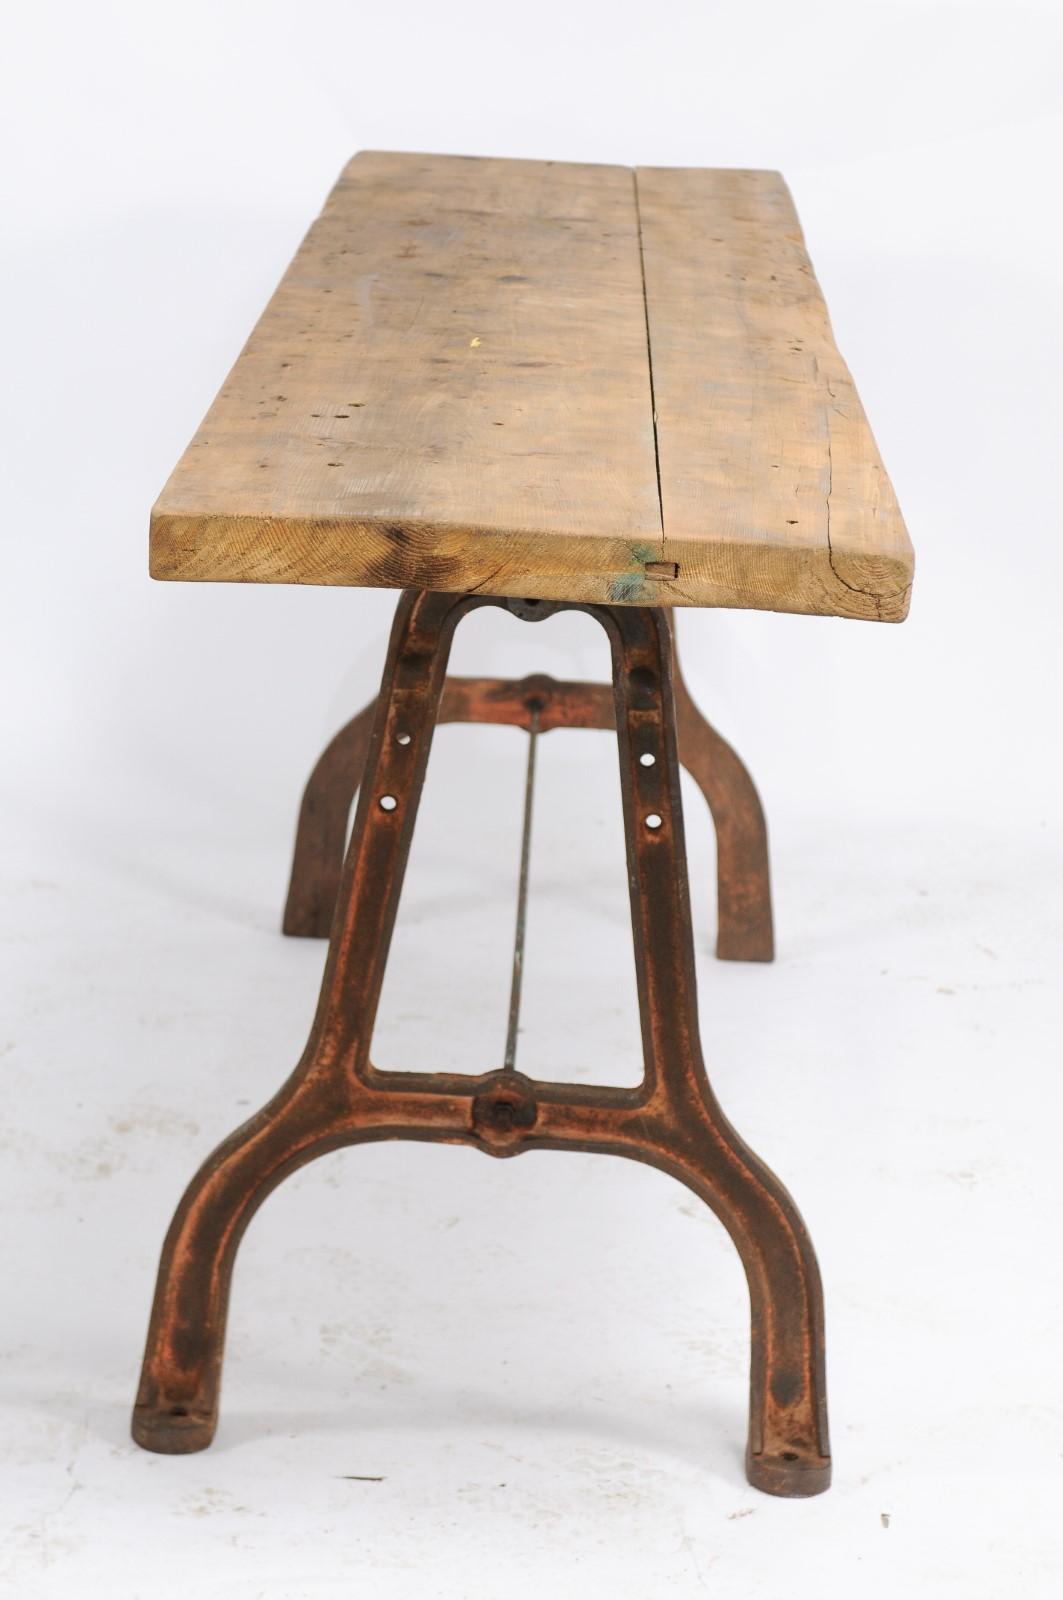 A French console table from the second quarter of the 20th century, with rectangular oak top and iron base. Straight from an iron worker’s studio in the South of France, this 1940s console table has a handsome thick plateau made of oak and sits on a